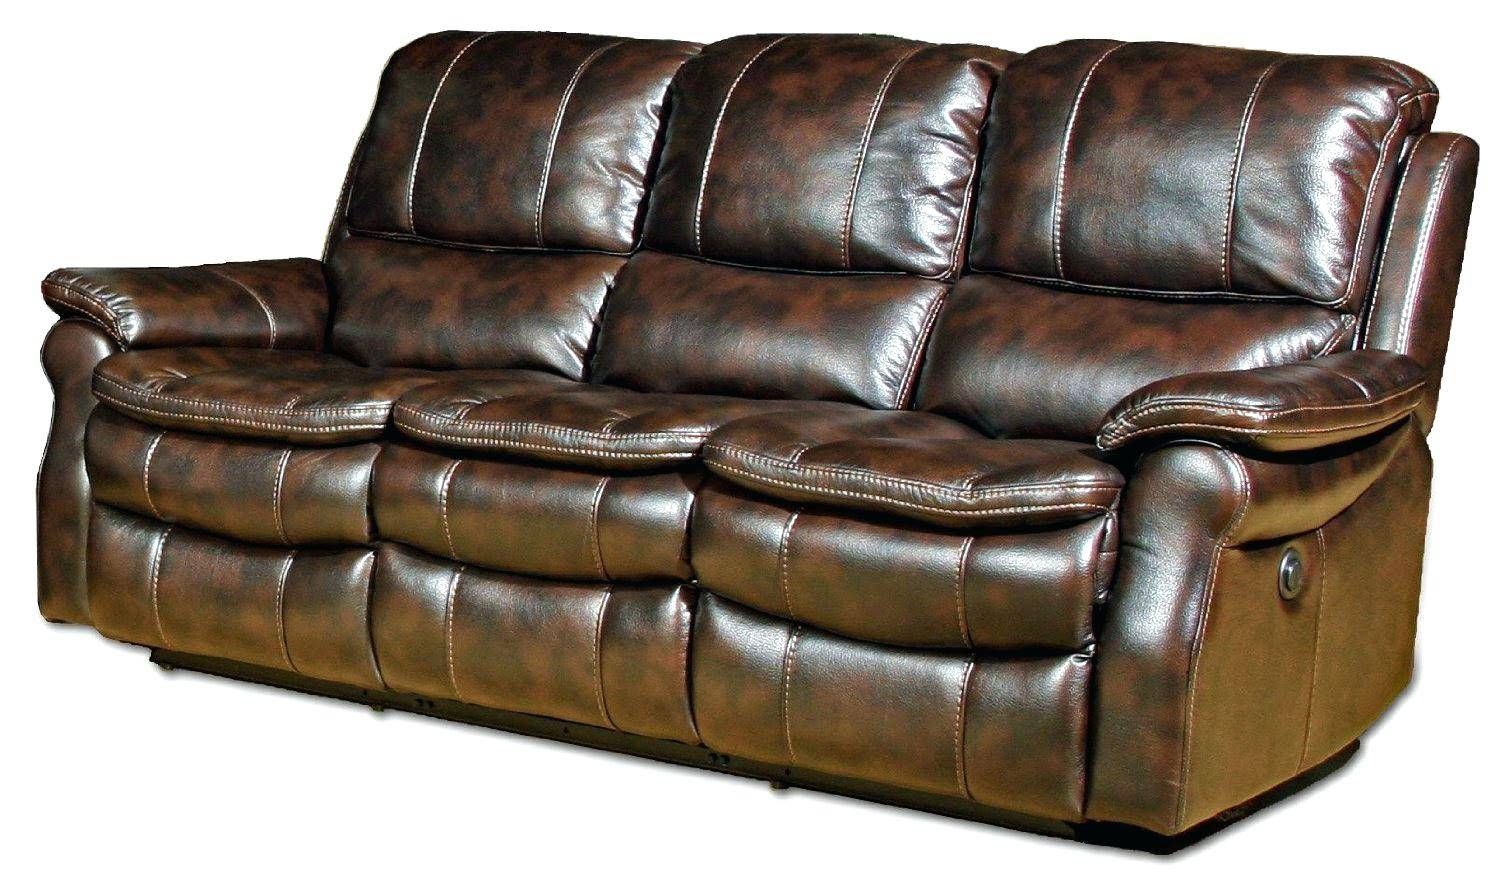 sale on leather recliners sofa set